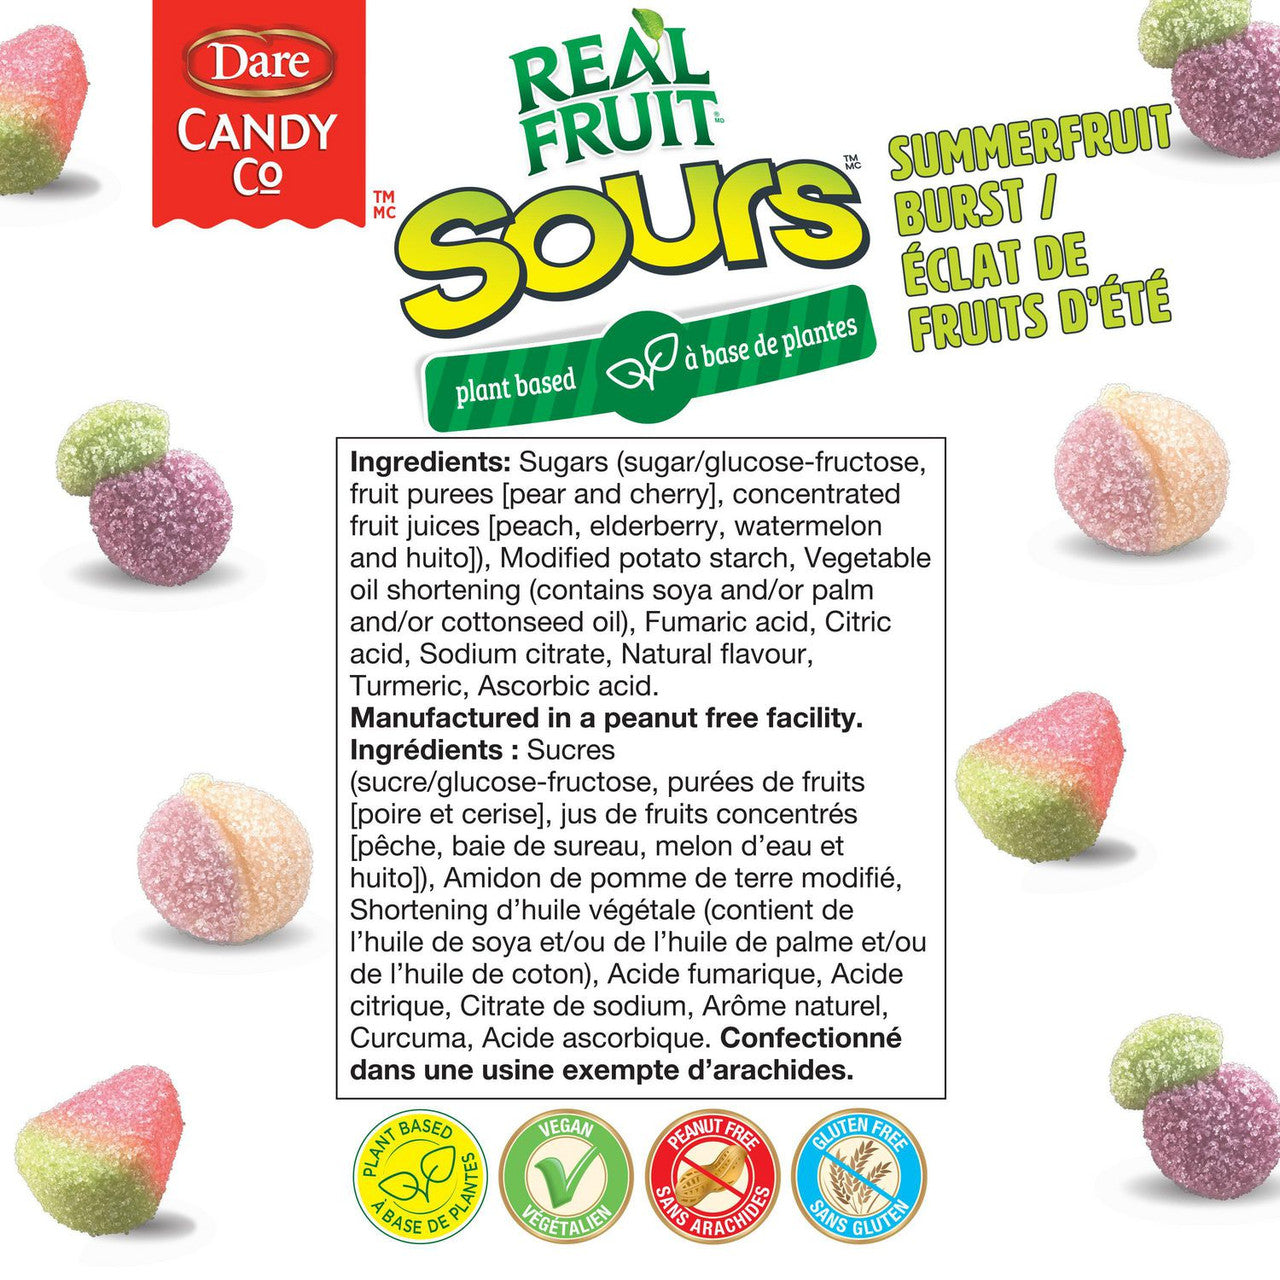 Dare RealFruit Sours Gummies Summerfruit Burst Flavor, 350g/12 oz., Bag, {Imported from Canada}